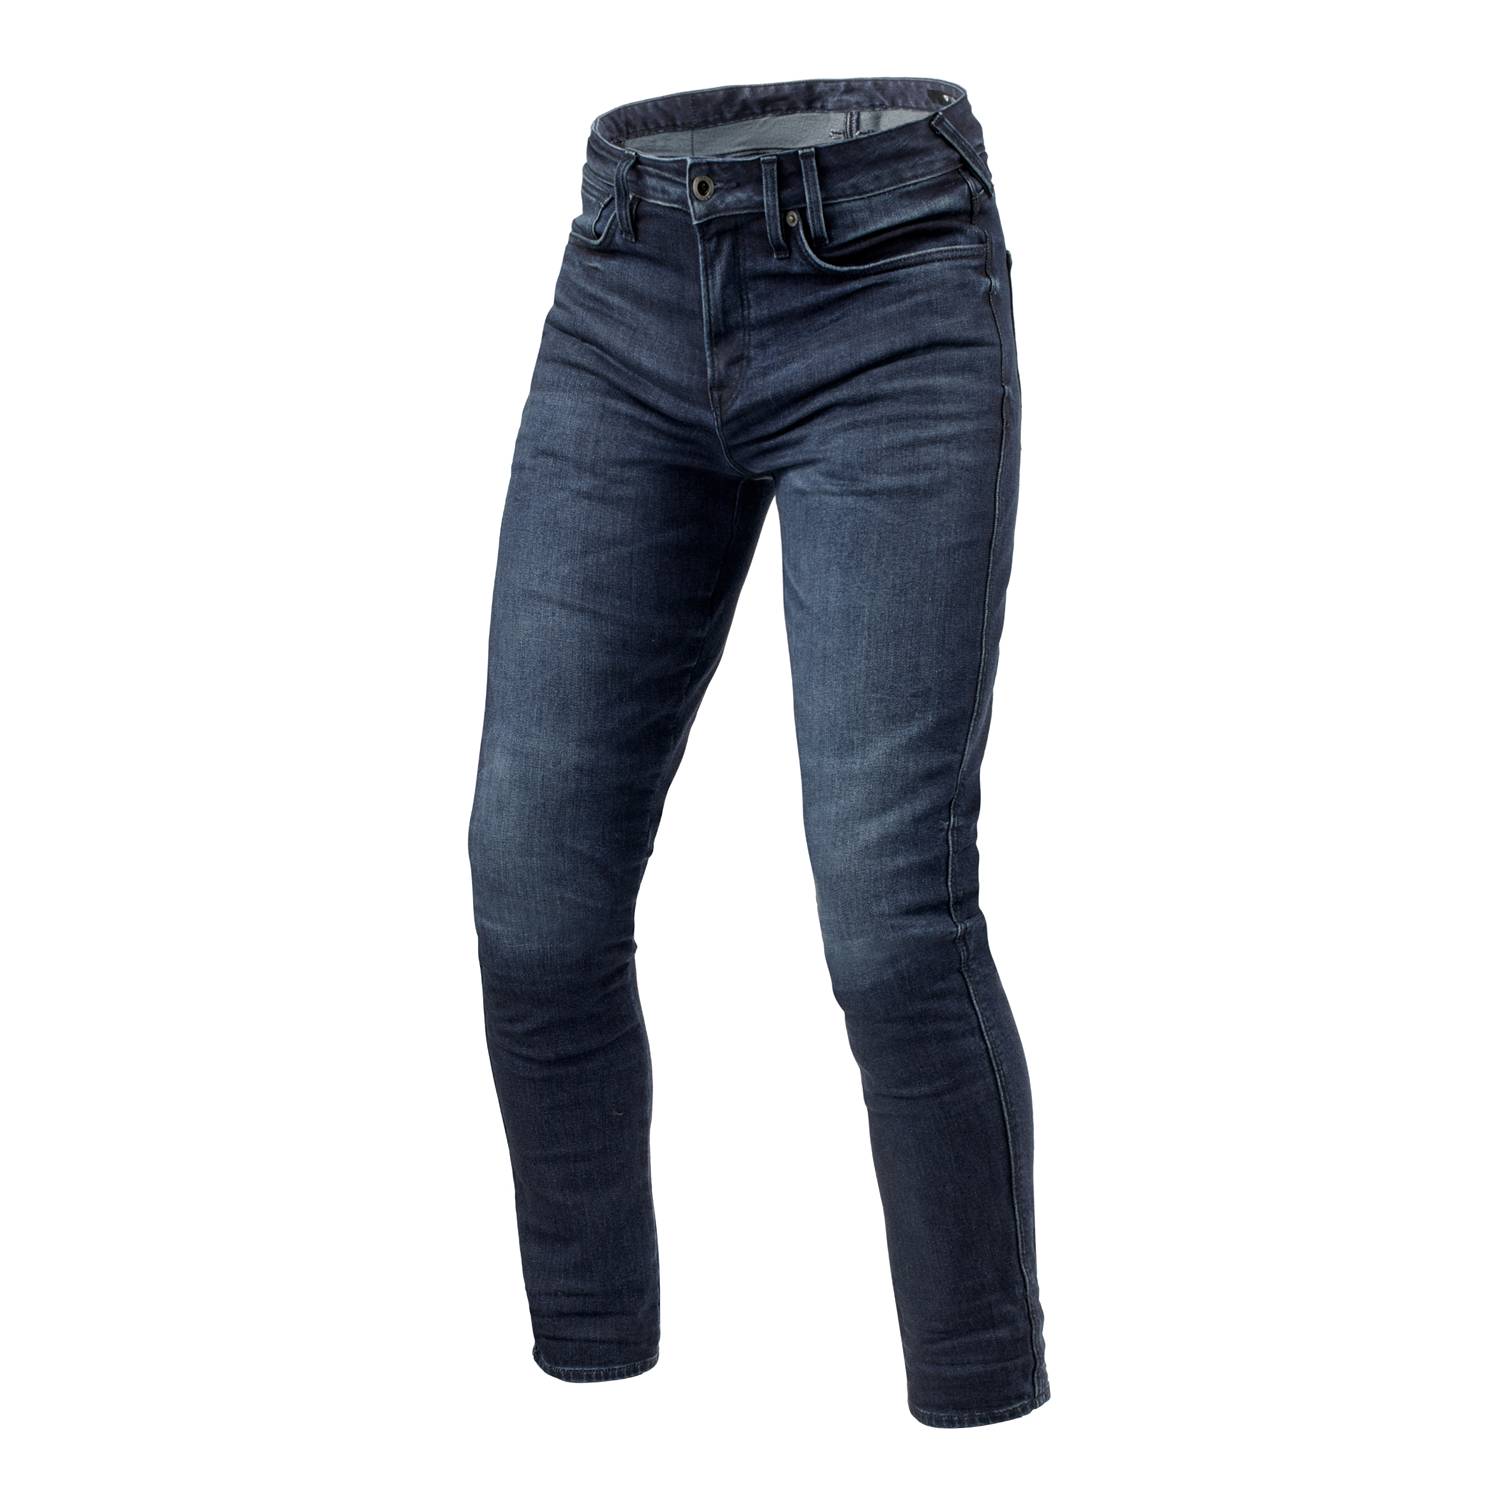 Image of REV'IT! Jeans Carlin SK Dark Blue Used L32 Motorcycle Jeans Taille L32/W33